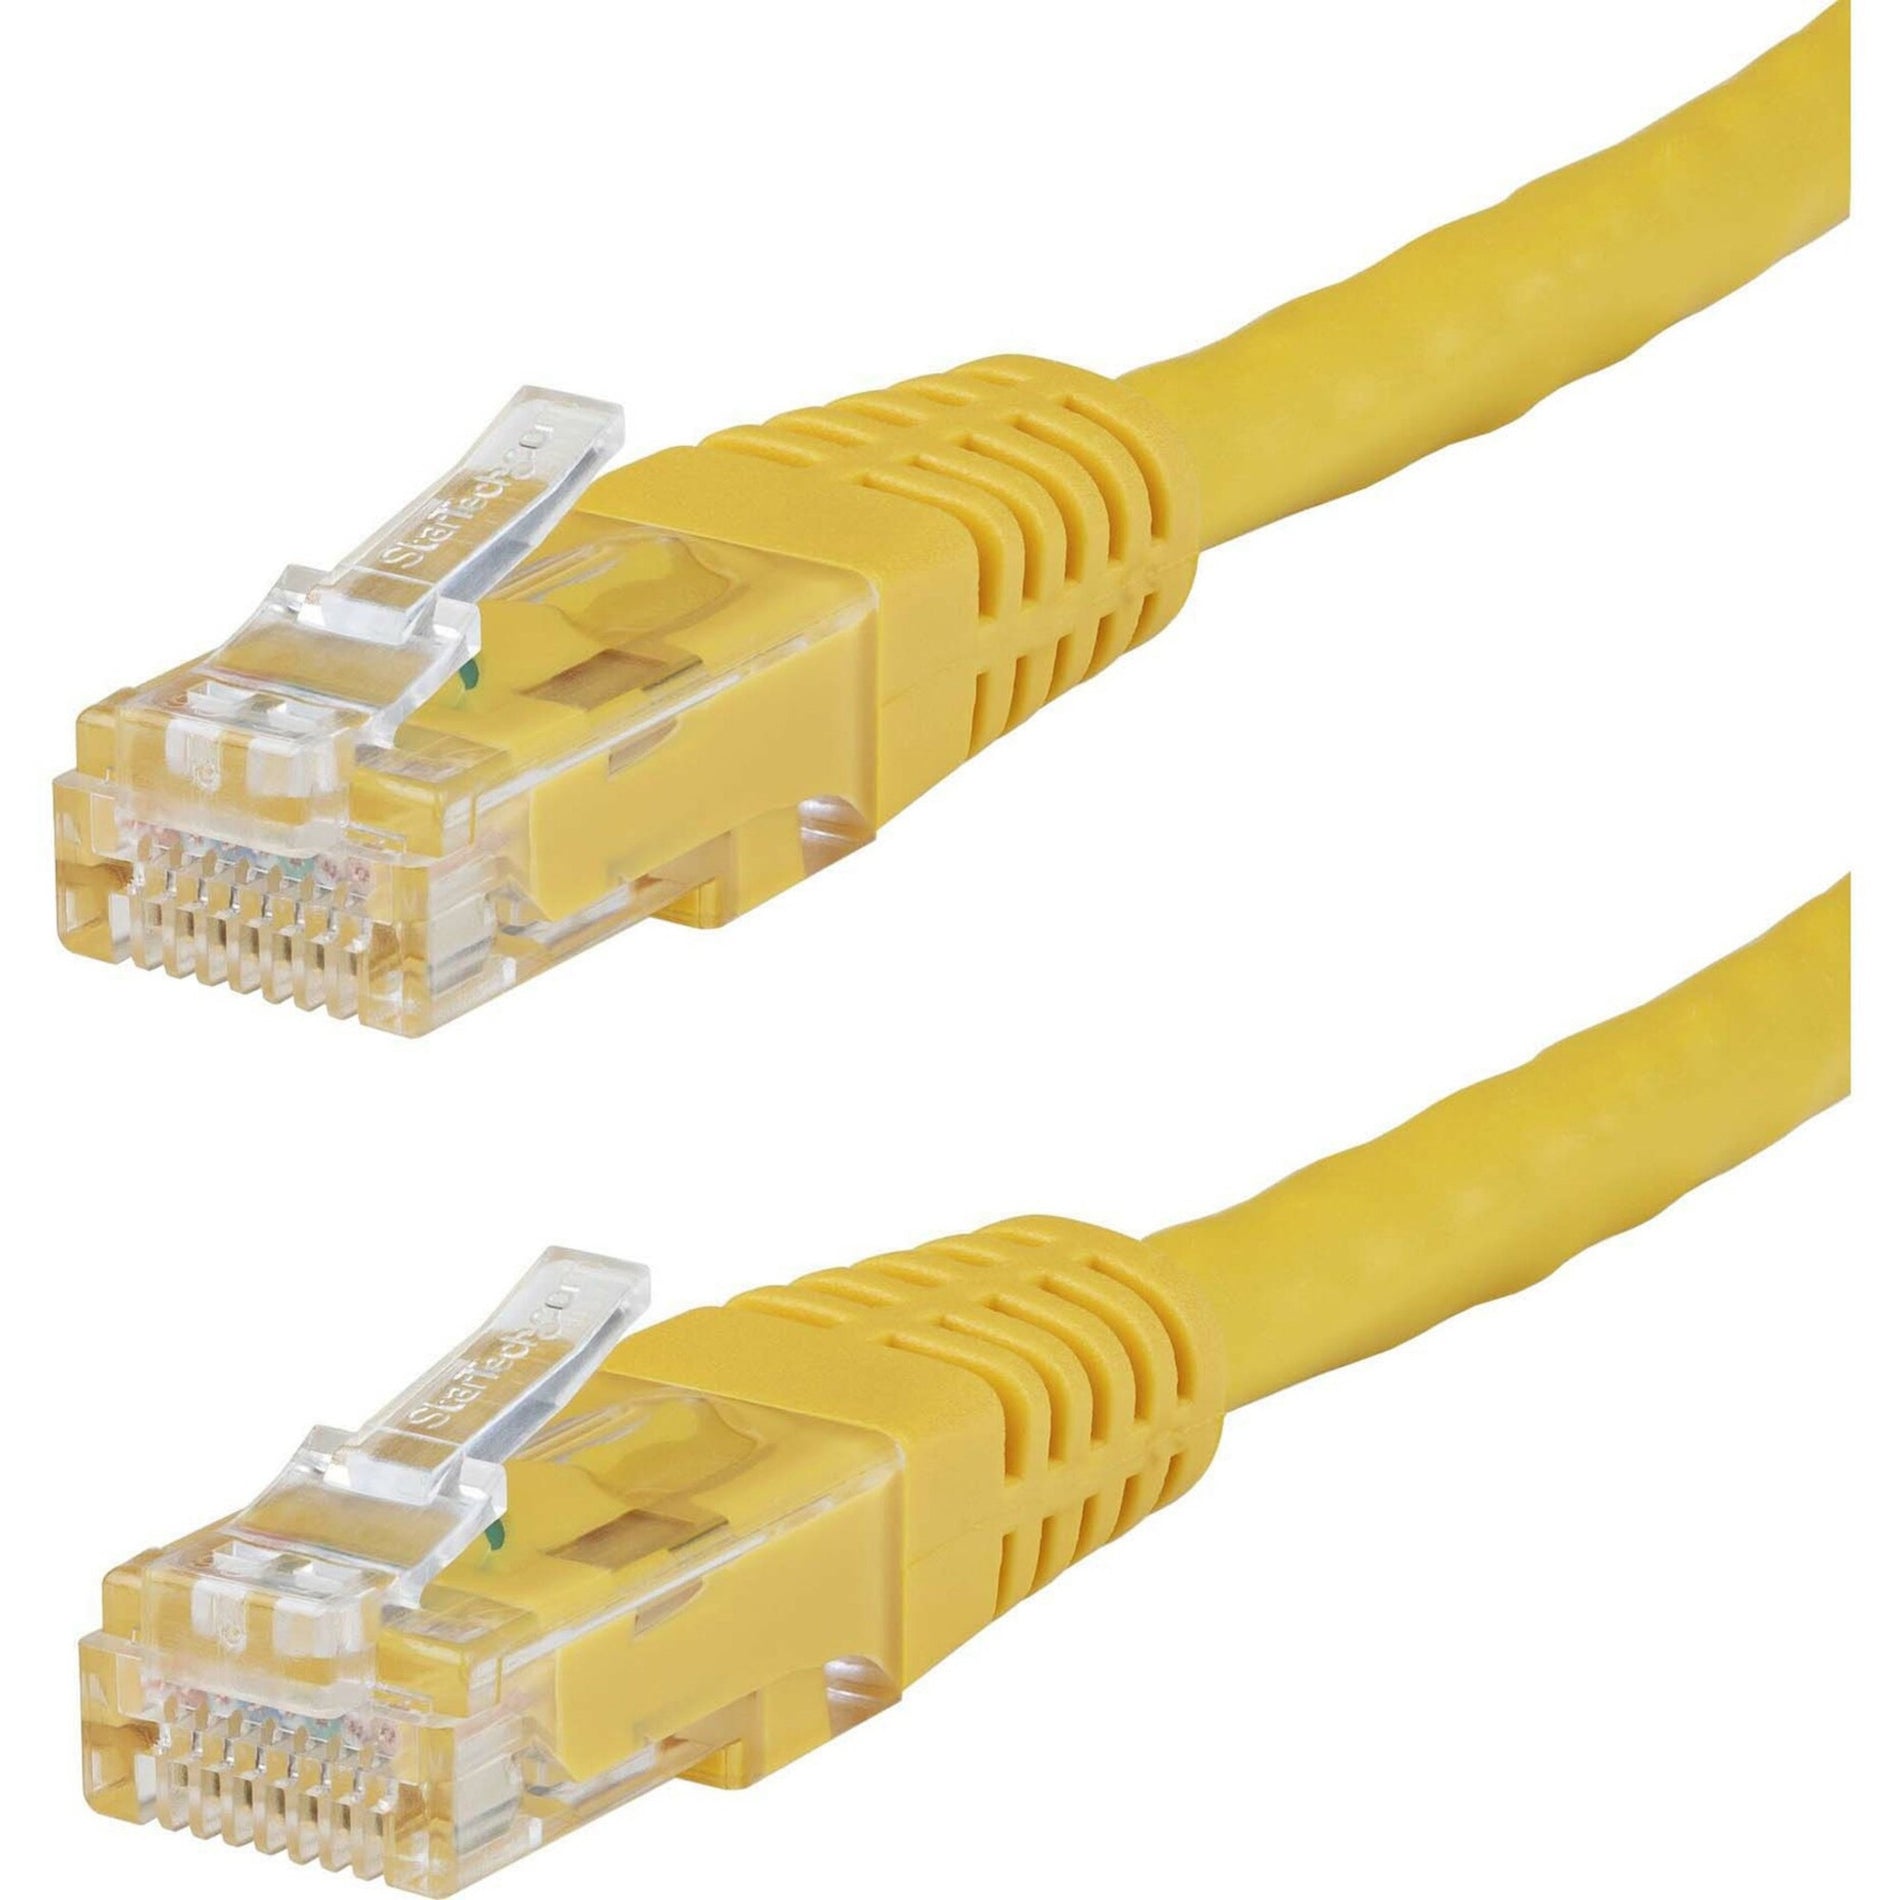 StarTech.com C6PATCH3YL 3ft Yellow Cat6 UTP Patch Cable ETL Verified, 10 Gbit/s Data Transfer Rate, Gold Plated Connectors